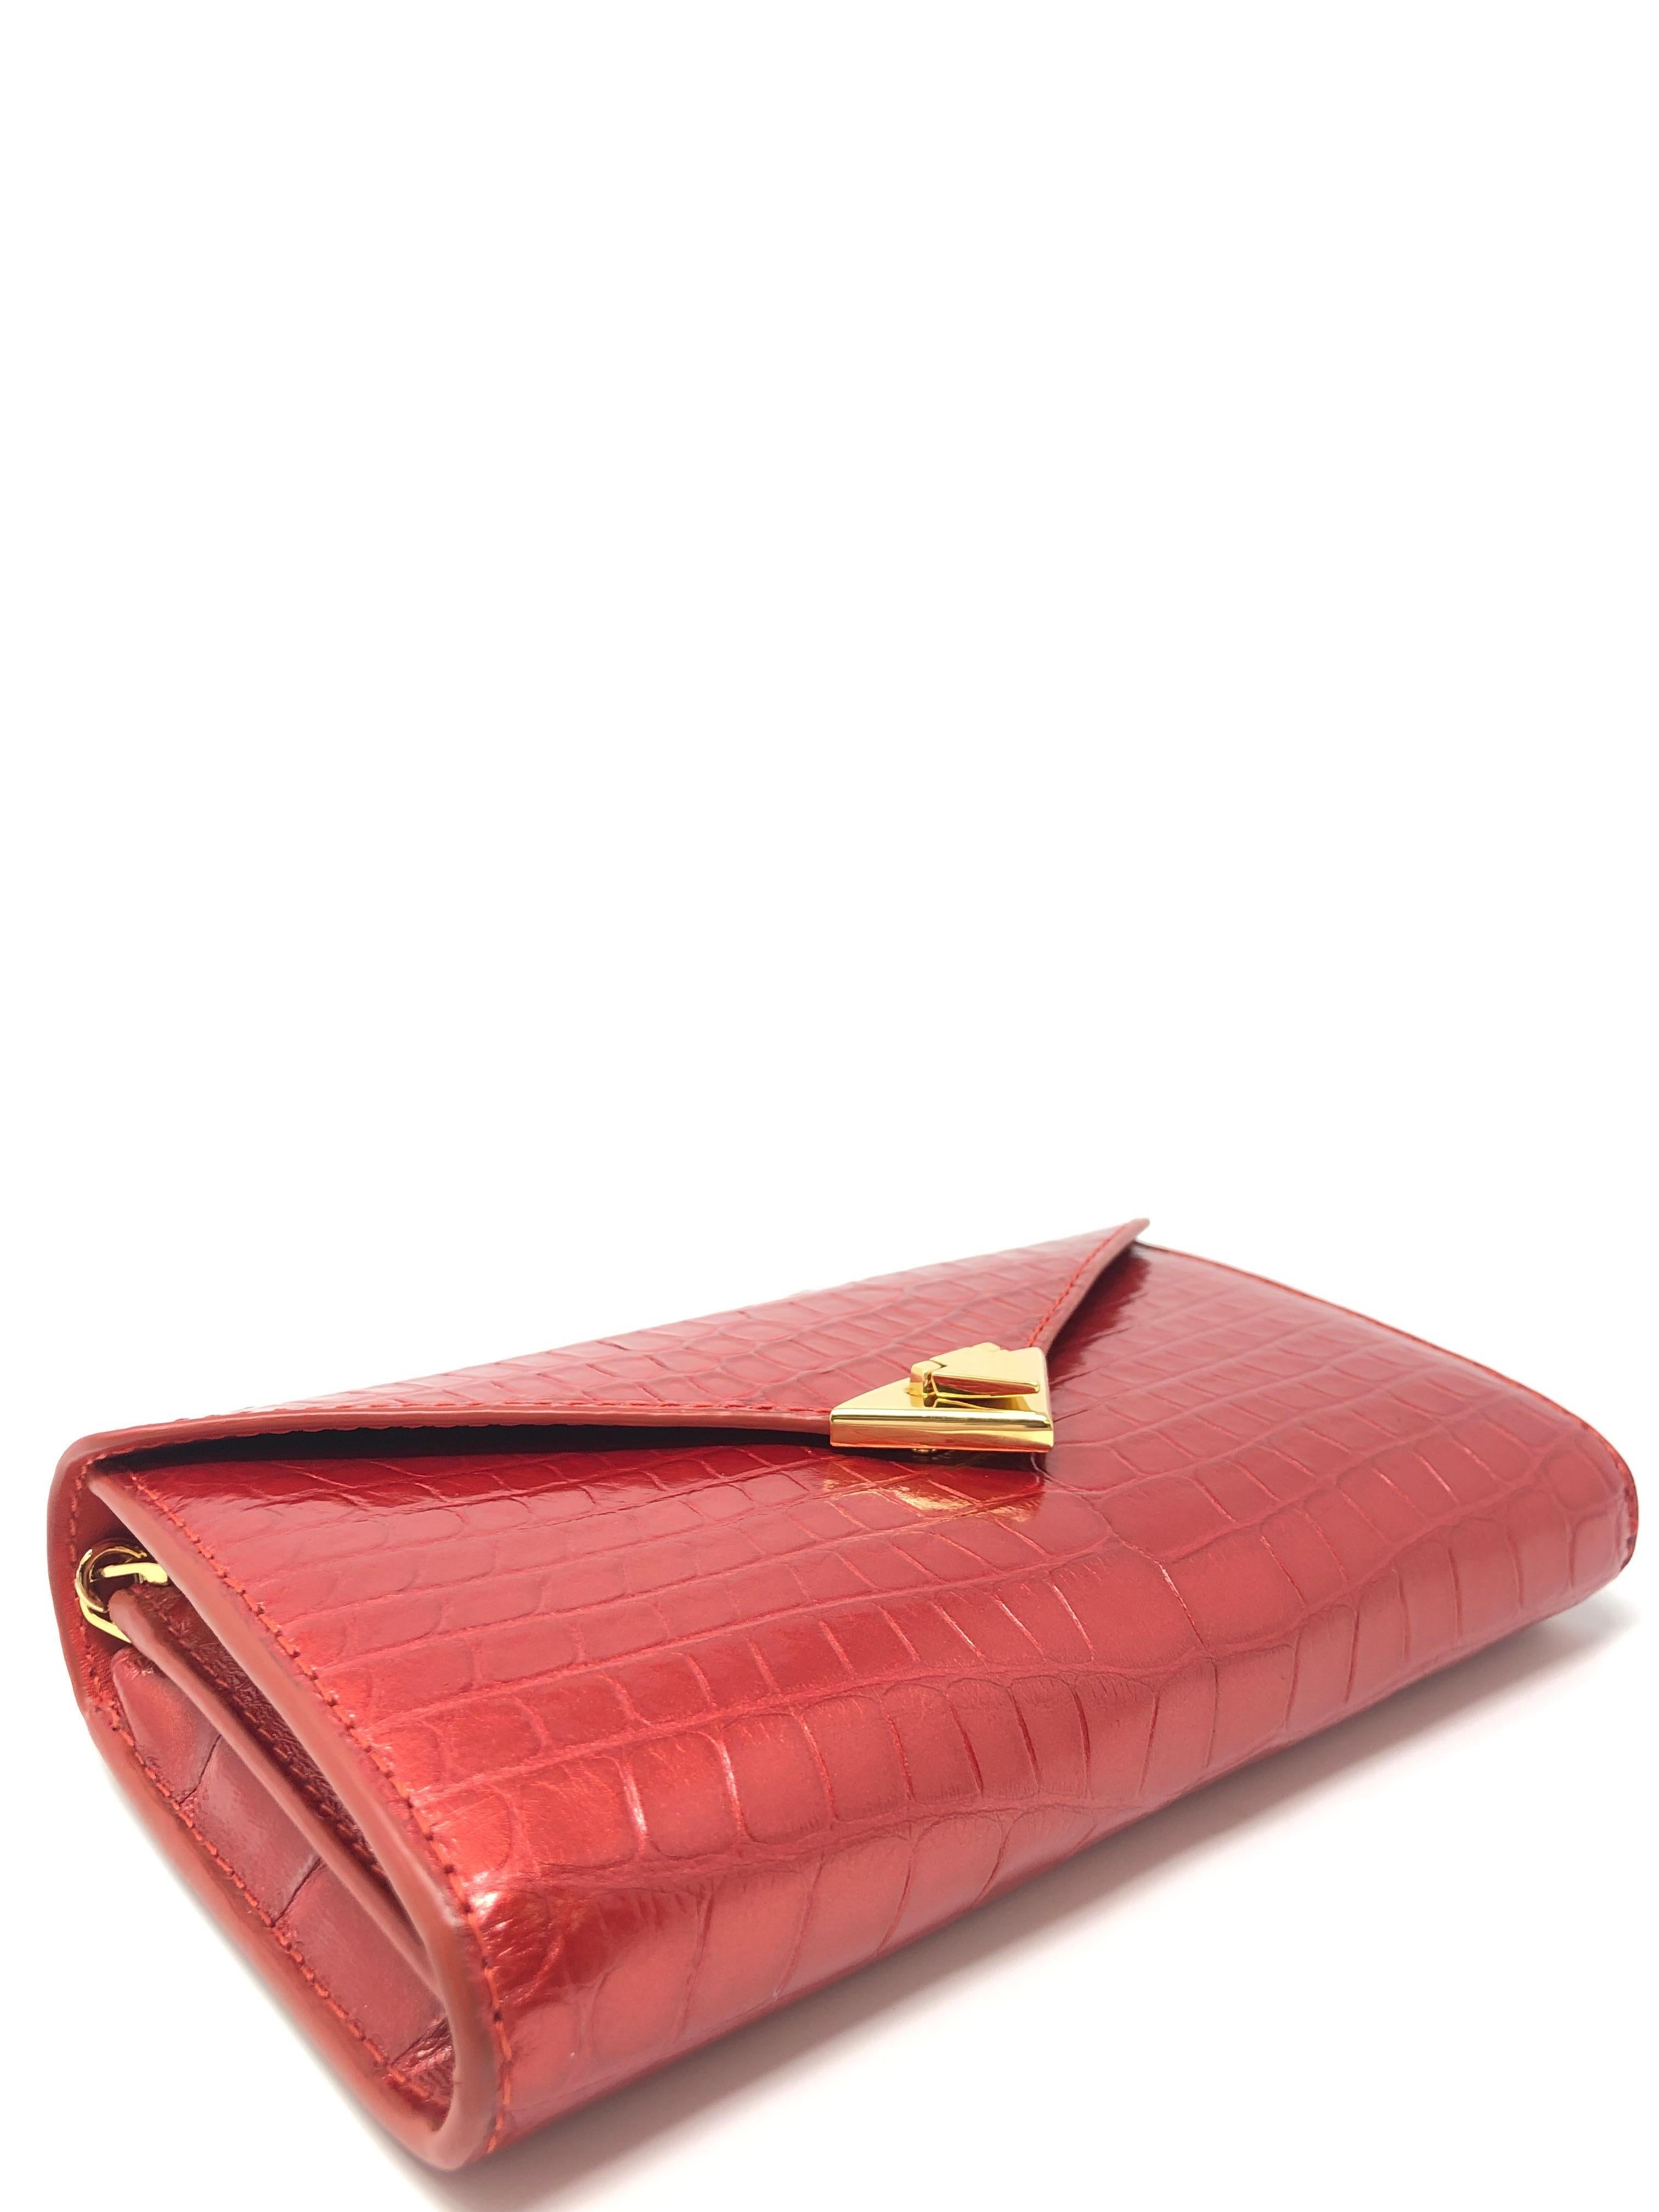 TYLER ELLIS Alex Wallet Candy Apple Red Glossy Alligator Gold Hardware In New Condition In Los Angeles, CA